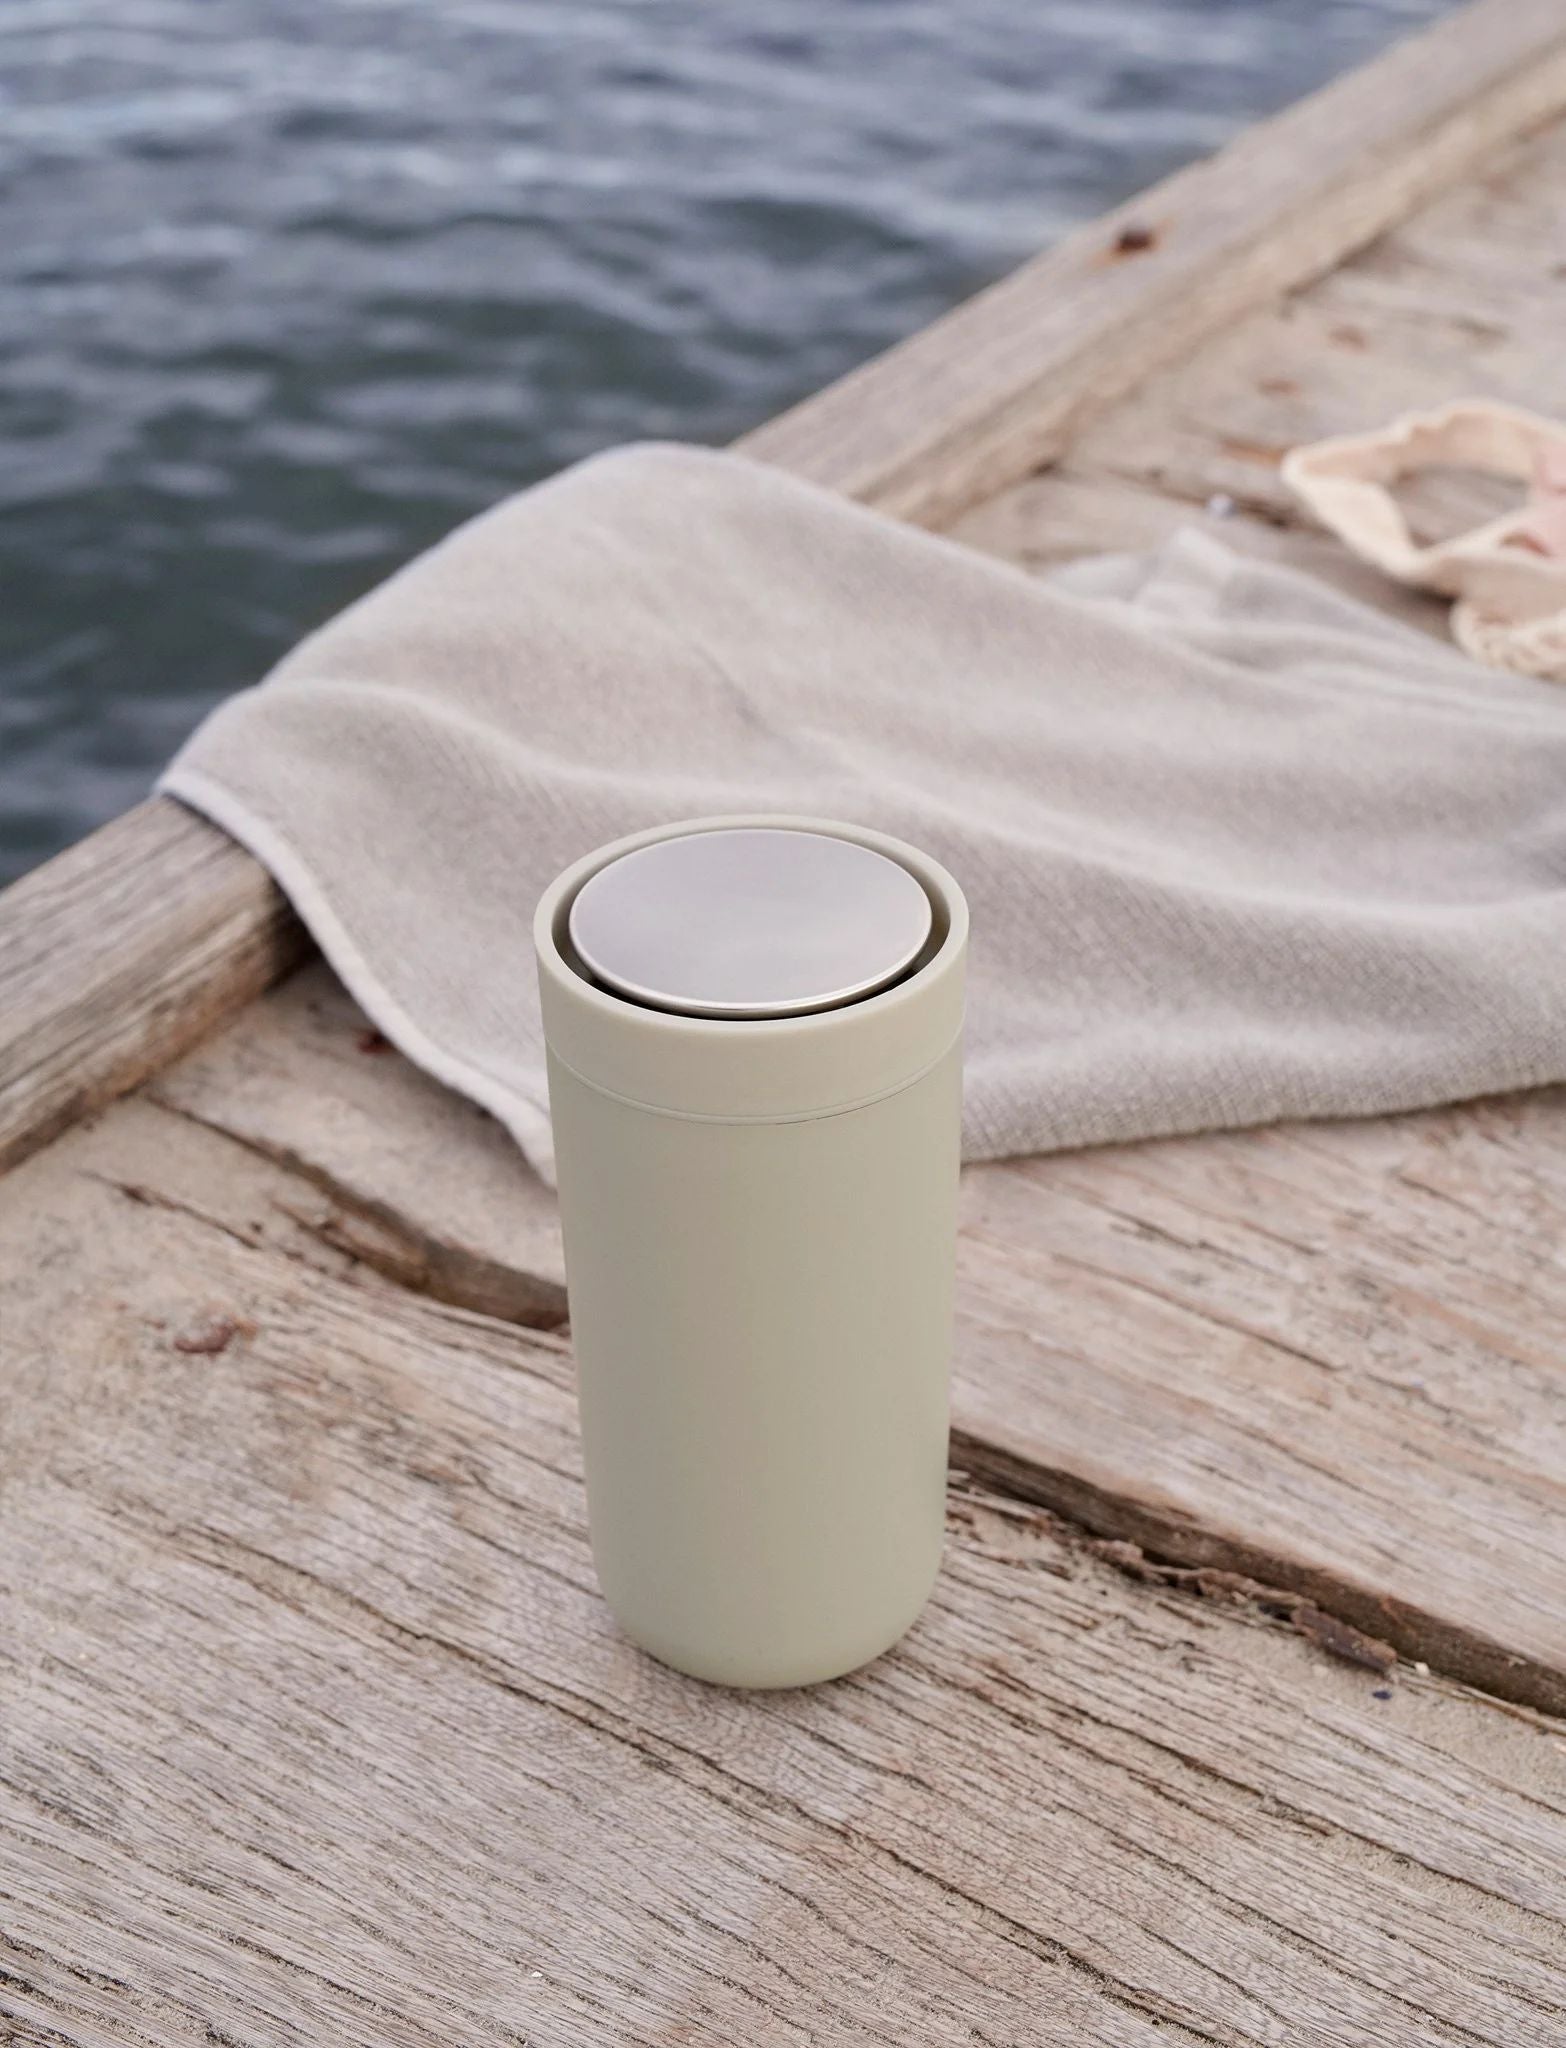 Stelton To Go Click Vacuum Insulated Cup 0,2 L, Soft Sand